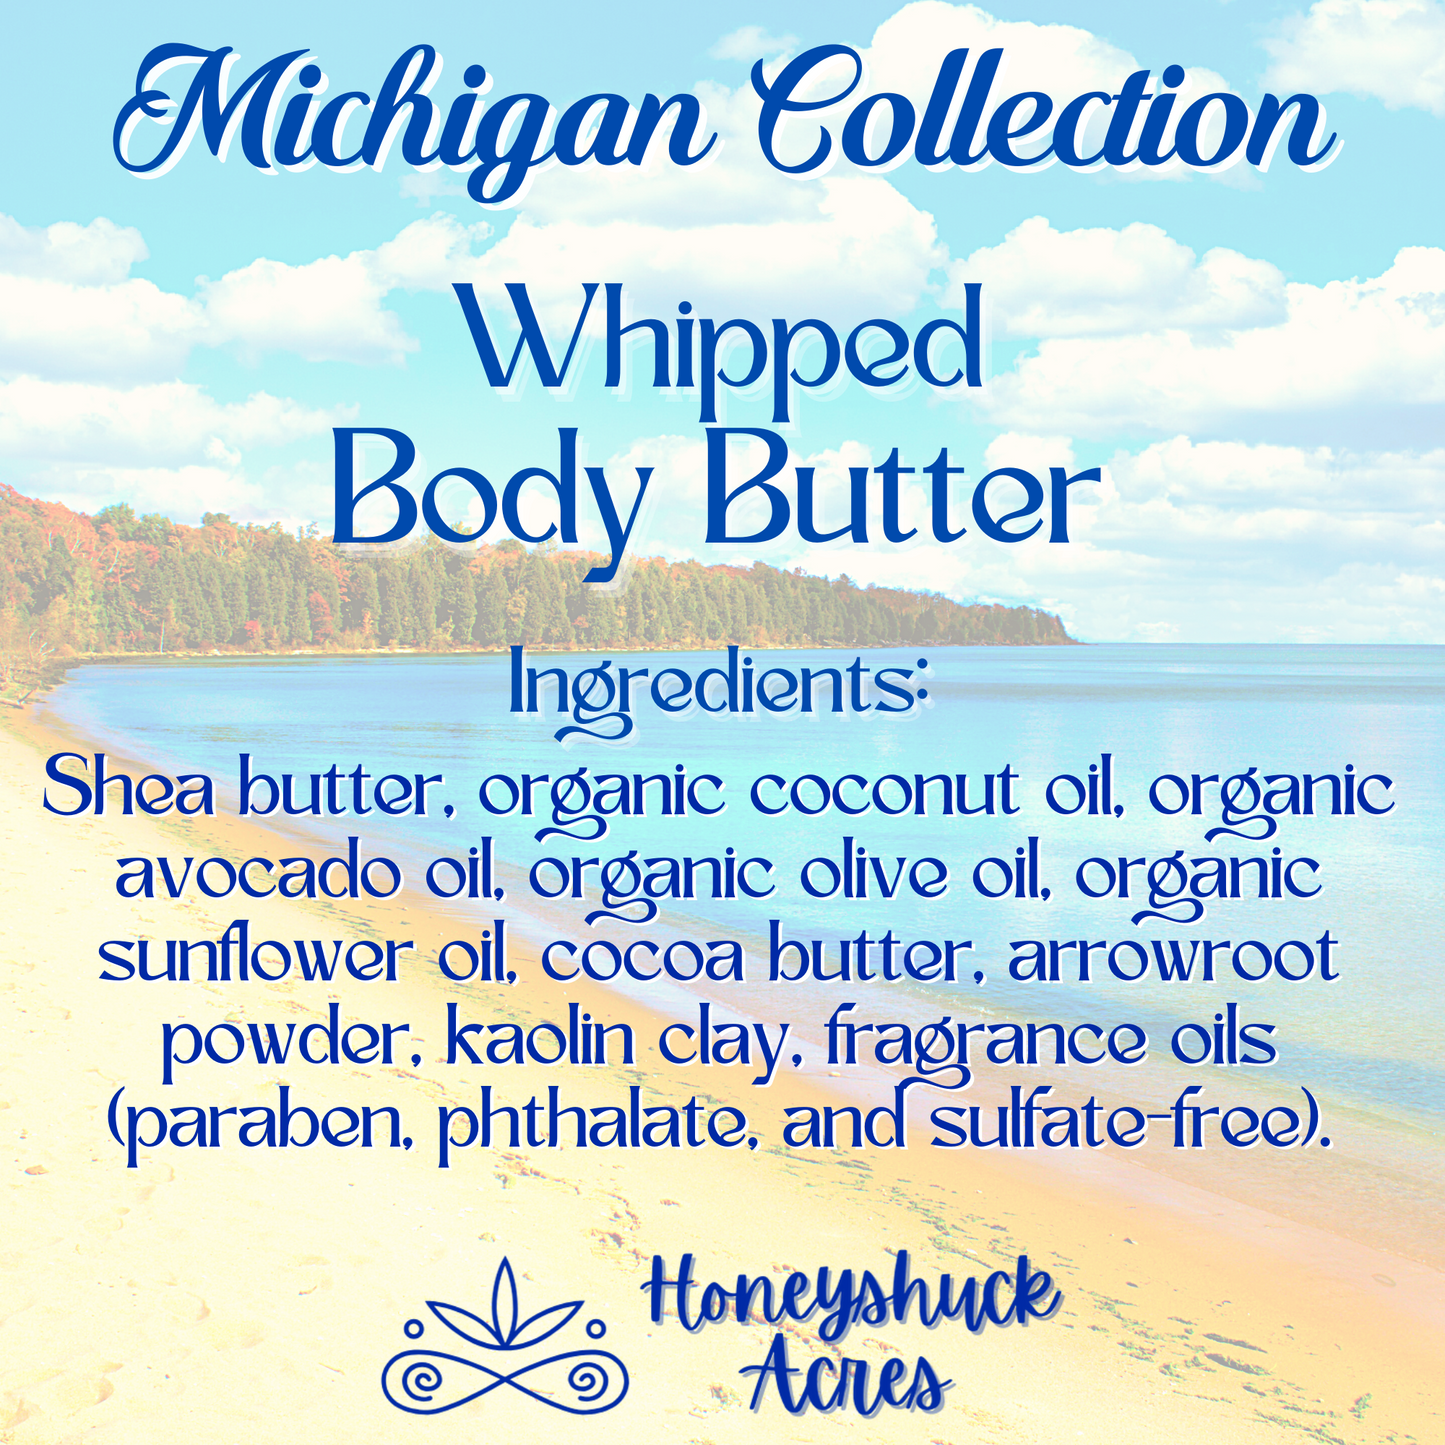 Michigan Whipped Body Butter | Old Mission Peninsula Inspired Scent | Choice of Size